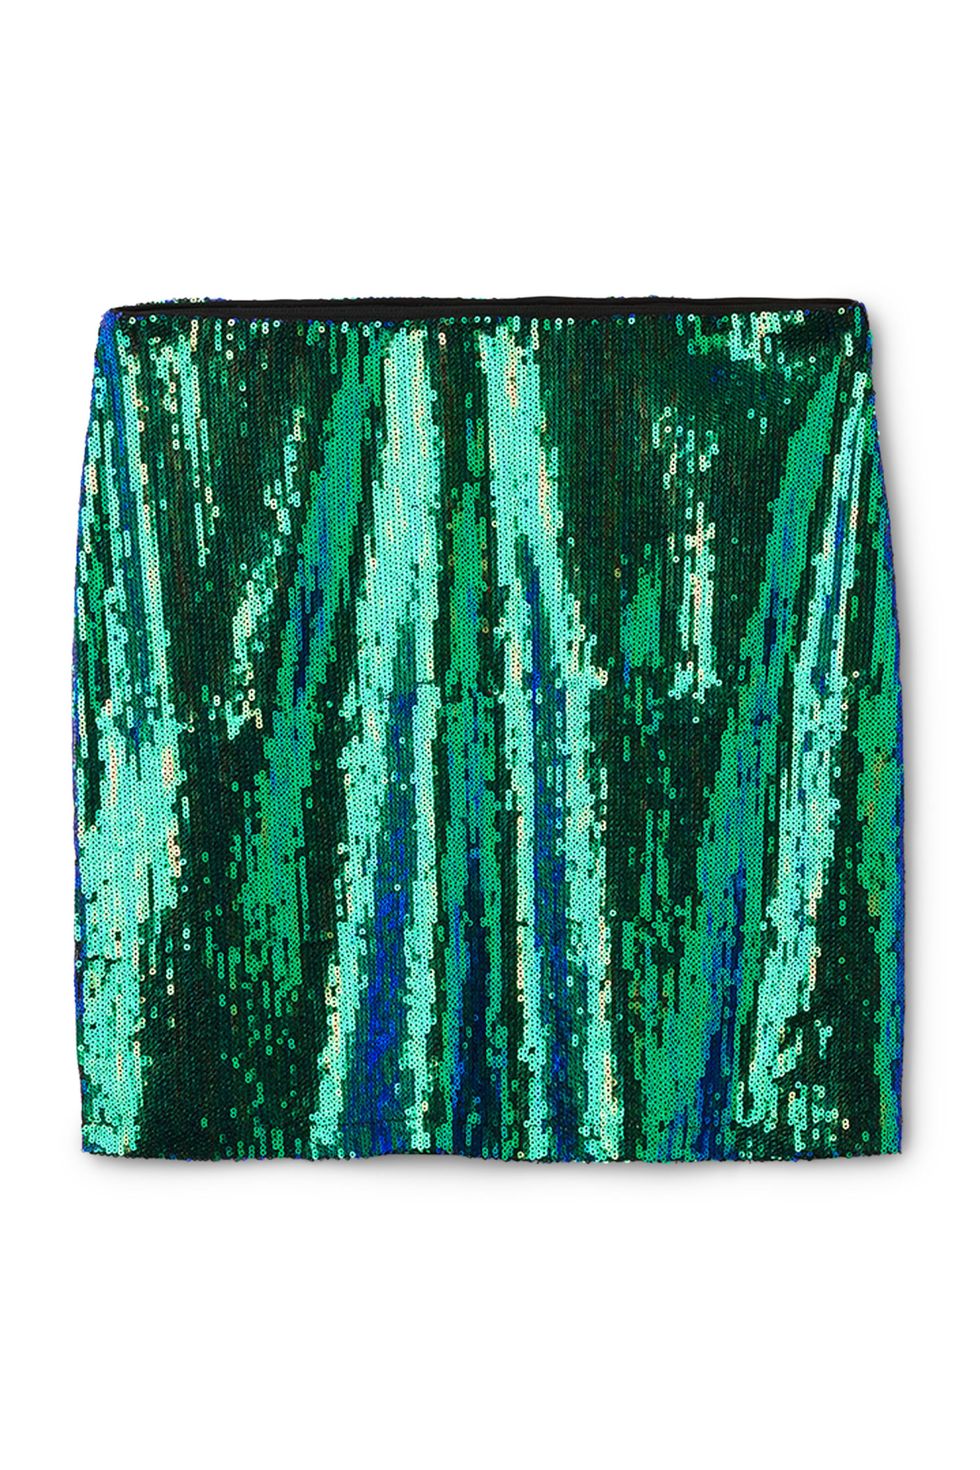 Green, Turquoise, Teal, Aqua, Wallet, Fashion accessory, Turquoise, Rectangle, 